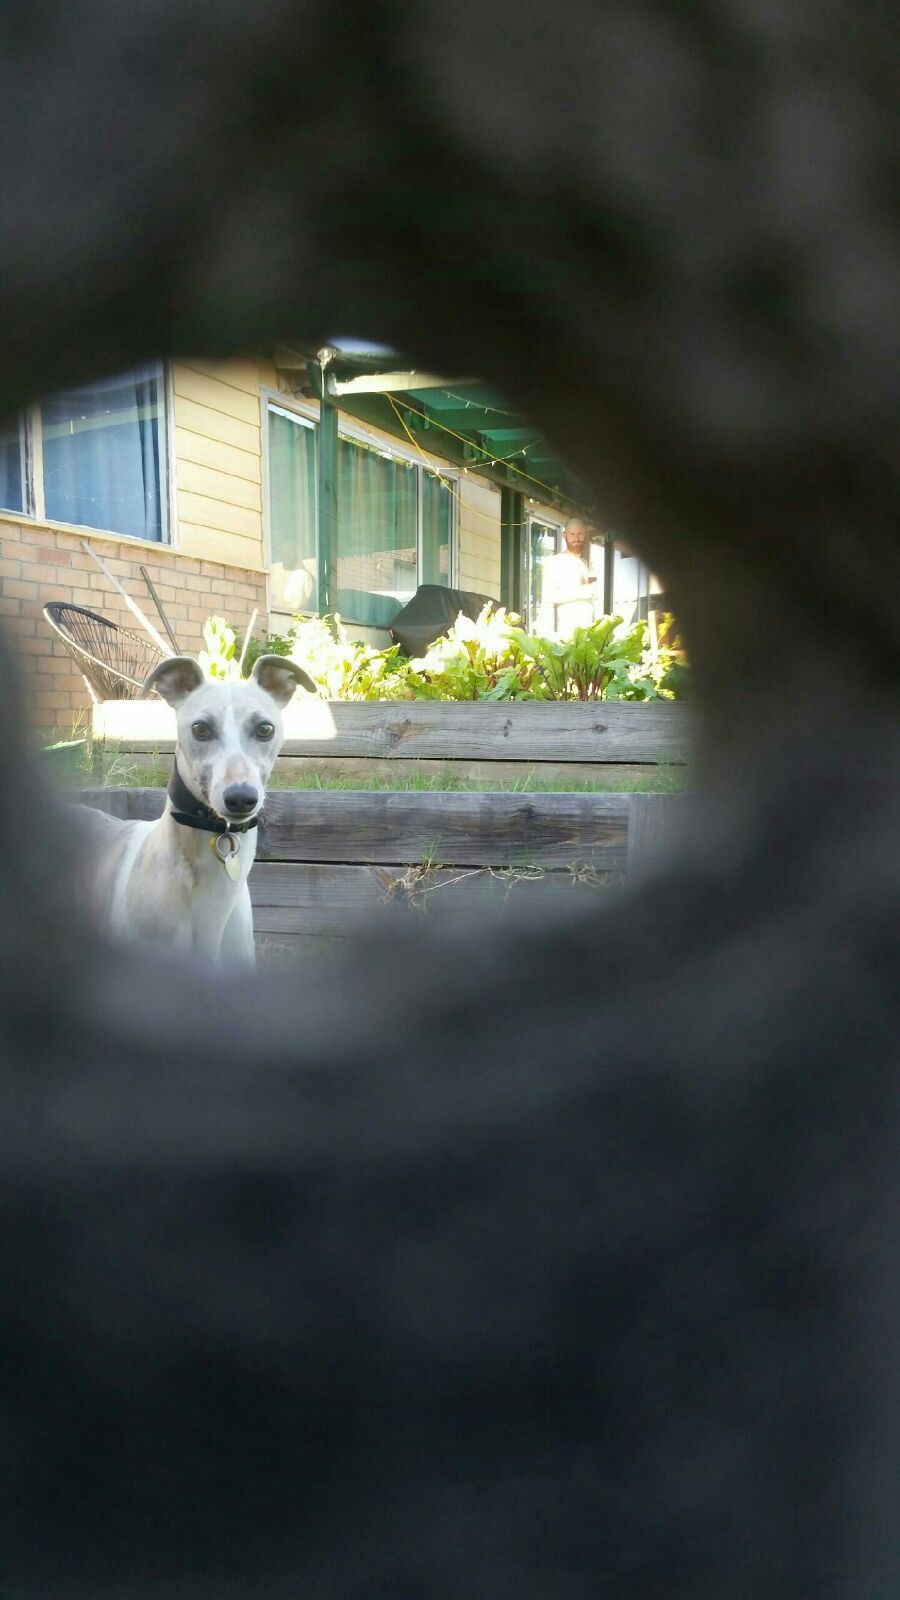 My friend took a picture of his neighbors dog through a hole in the fence. Zoom in...